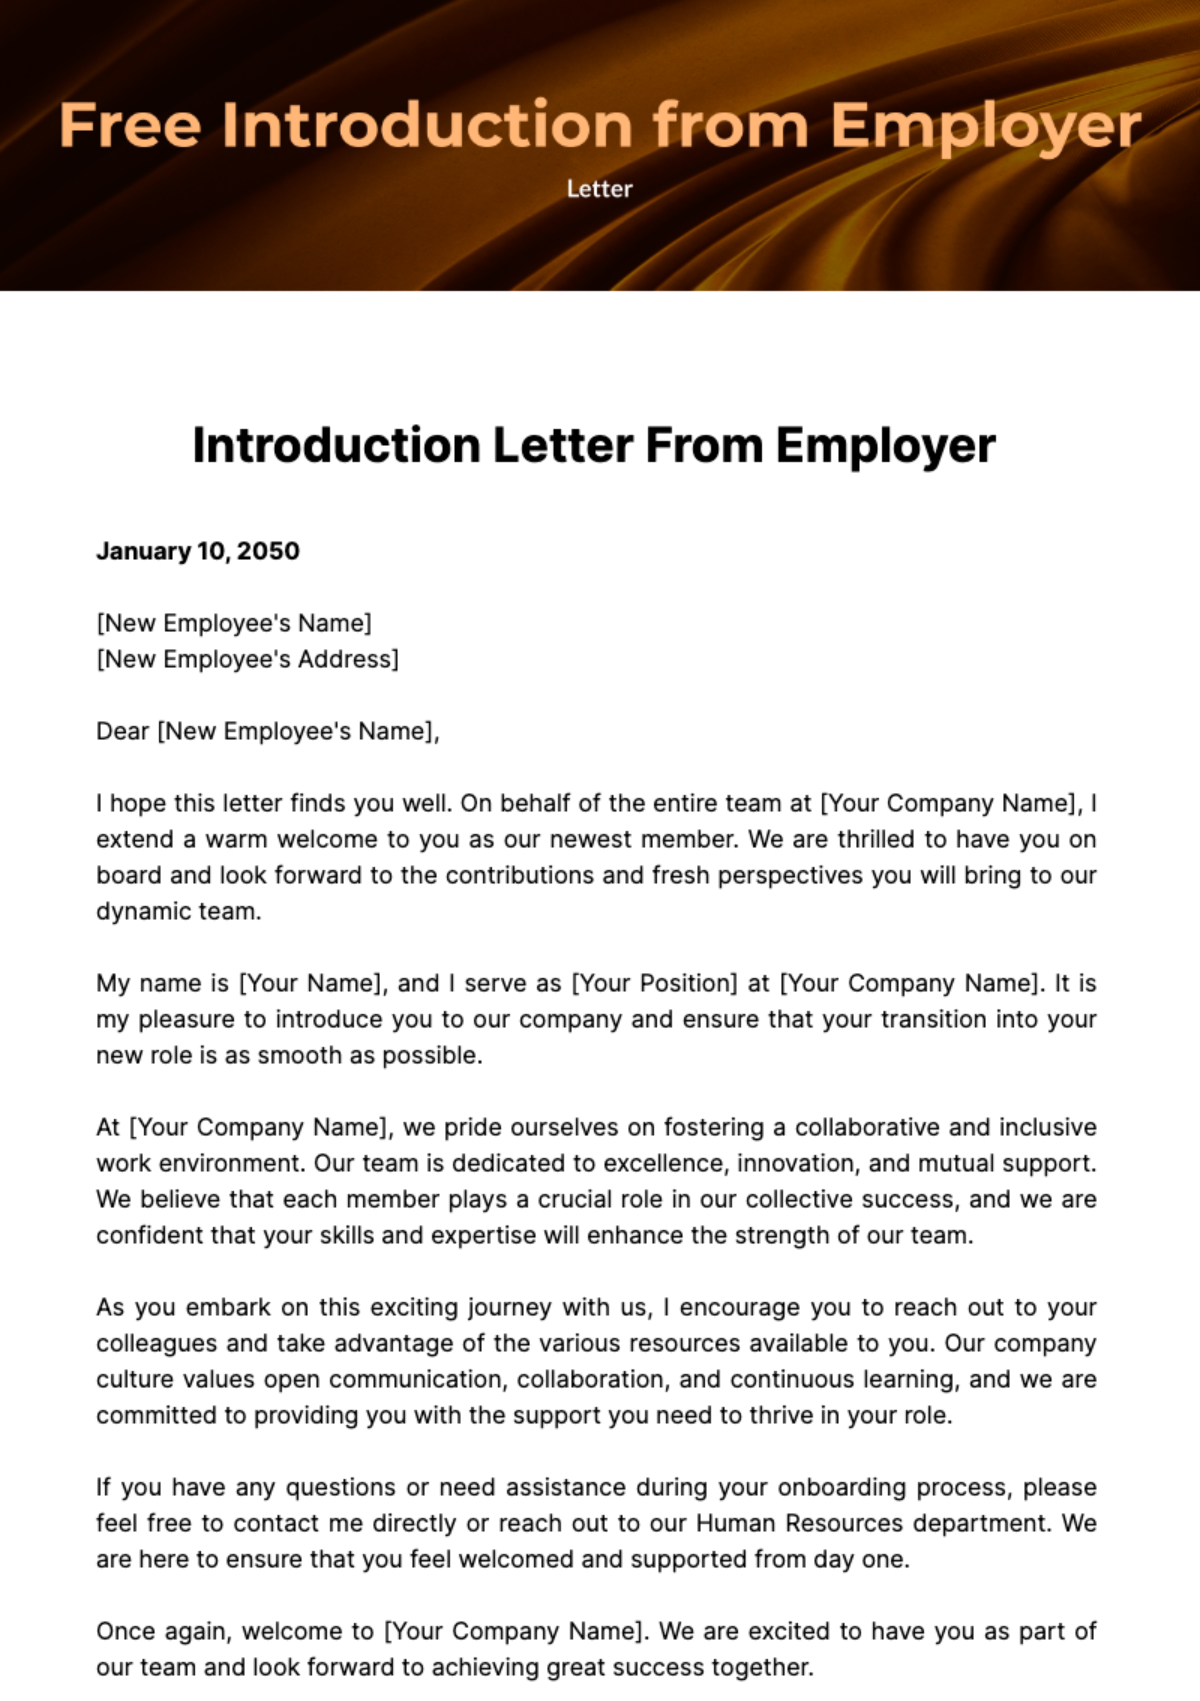 Free Introduction Letter from Employer Template